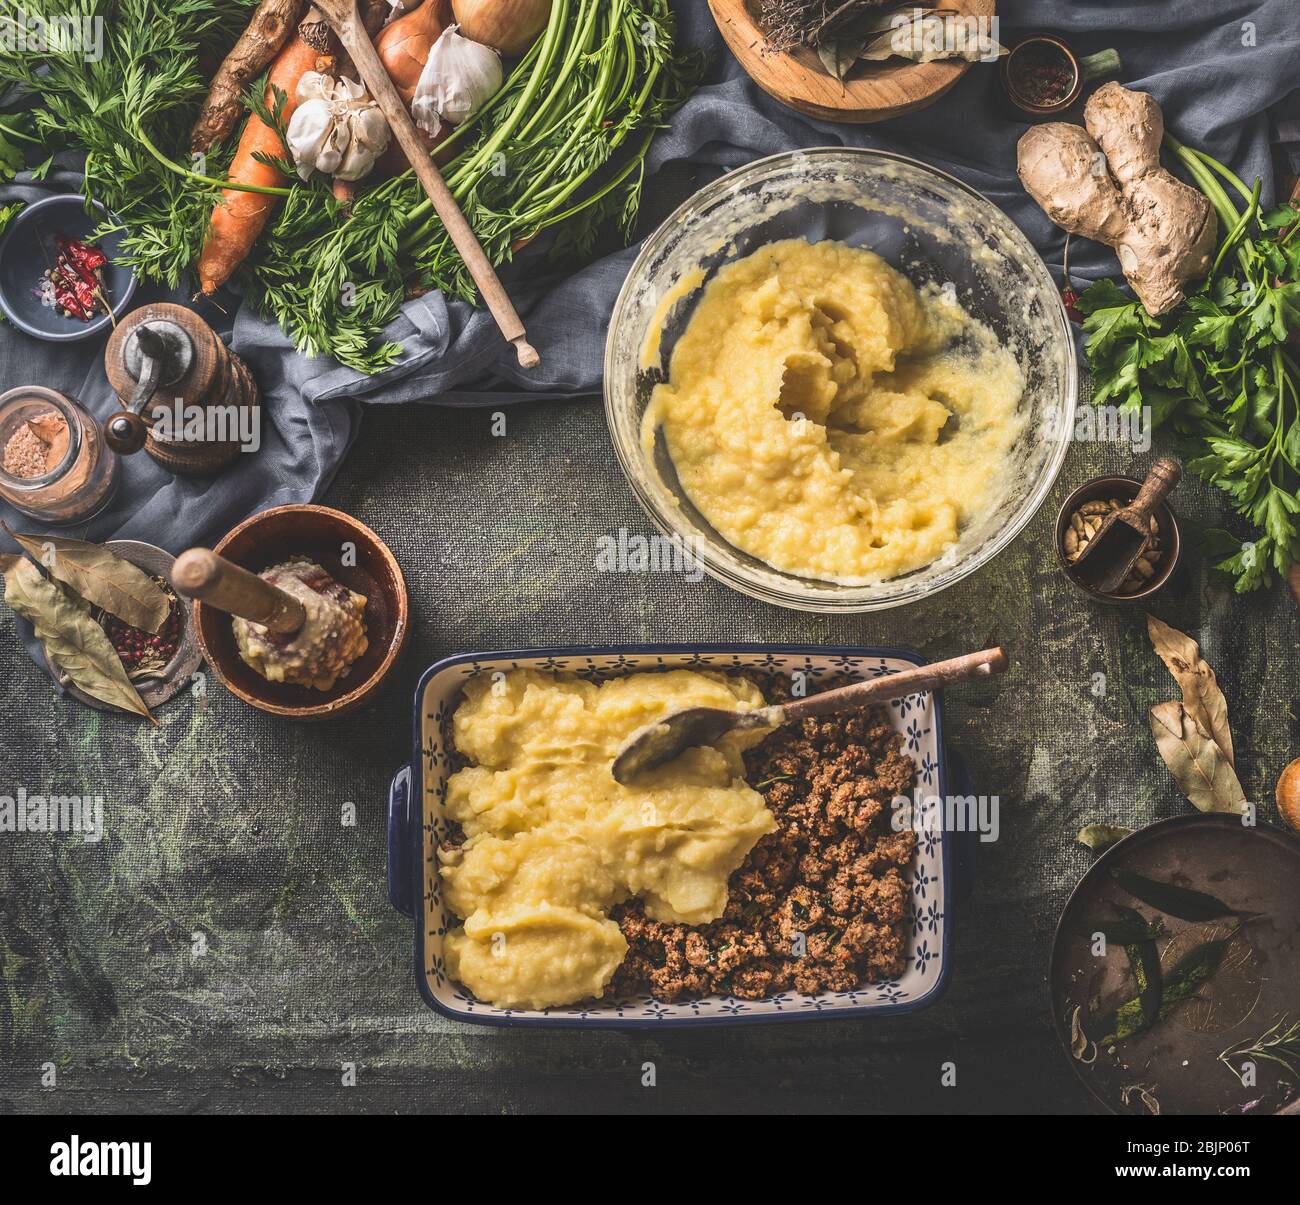 Mashed potato casserole with meat cooking. Ingredients on dark rustic kitchen table background. Top view. Tasty home cuisine. Stock Photo